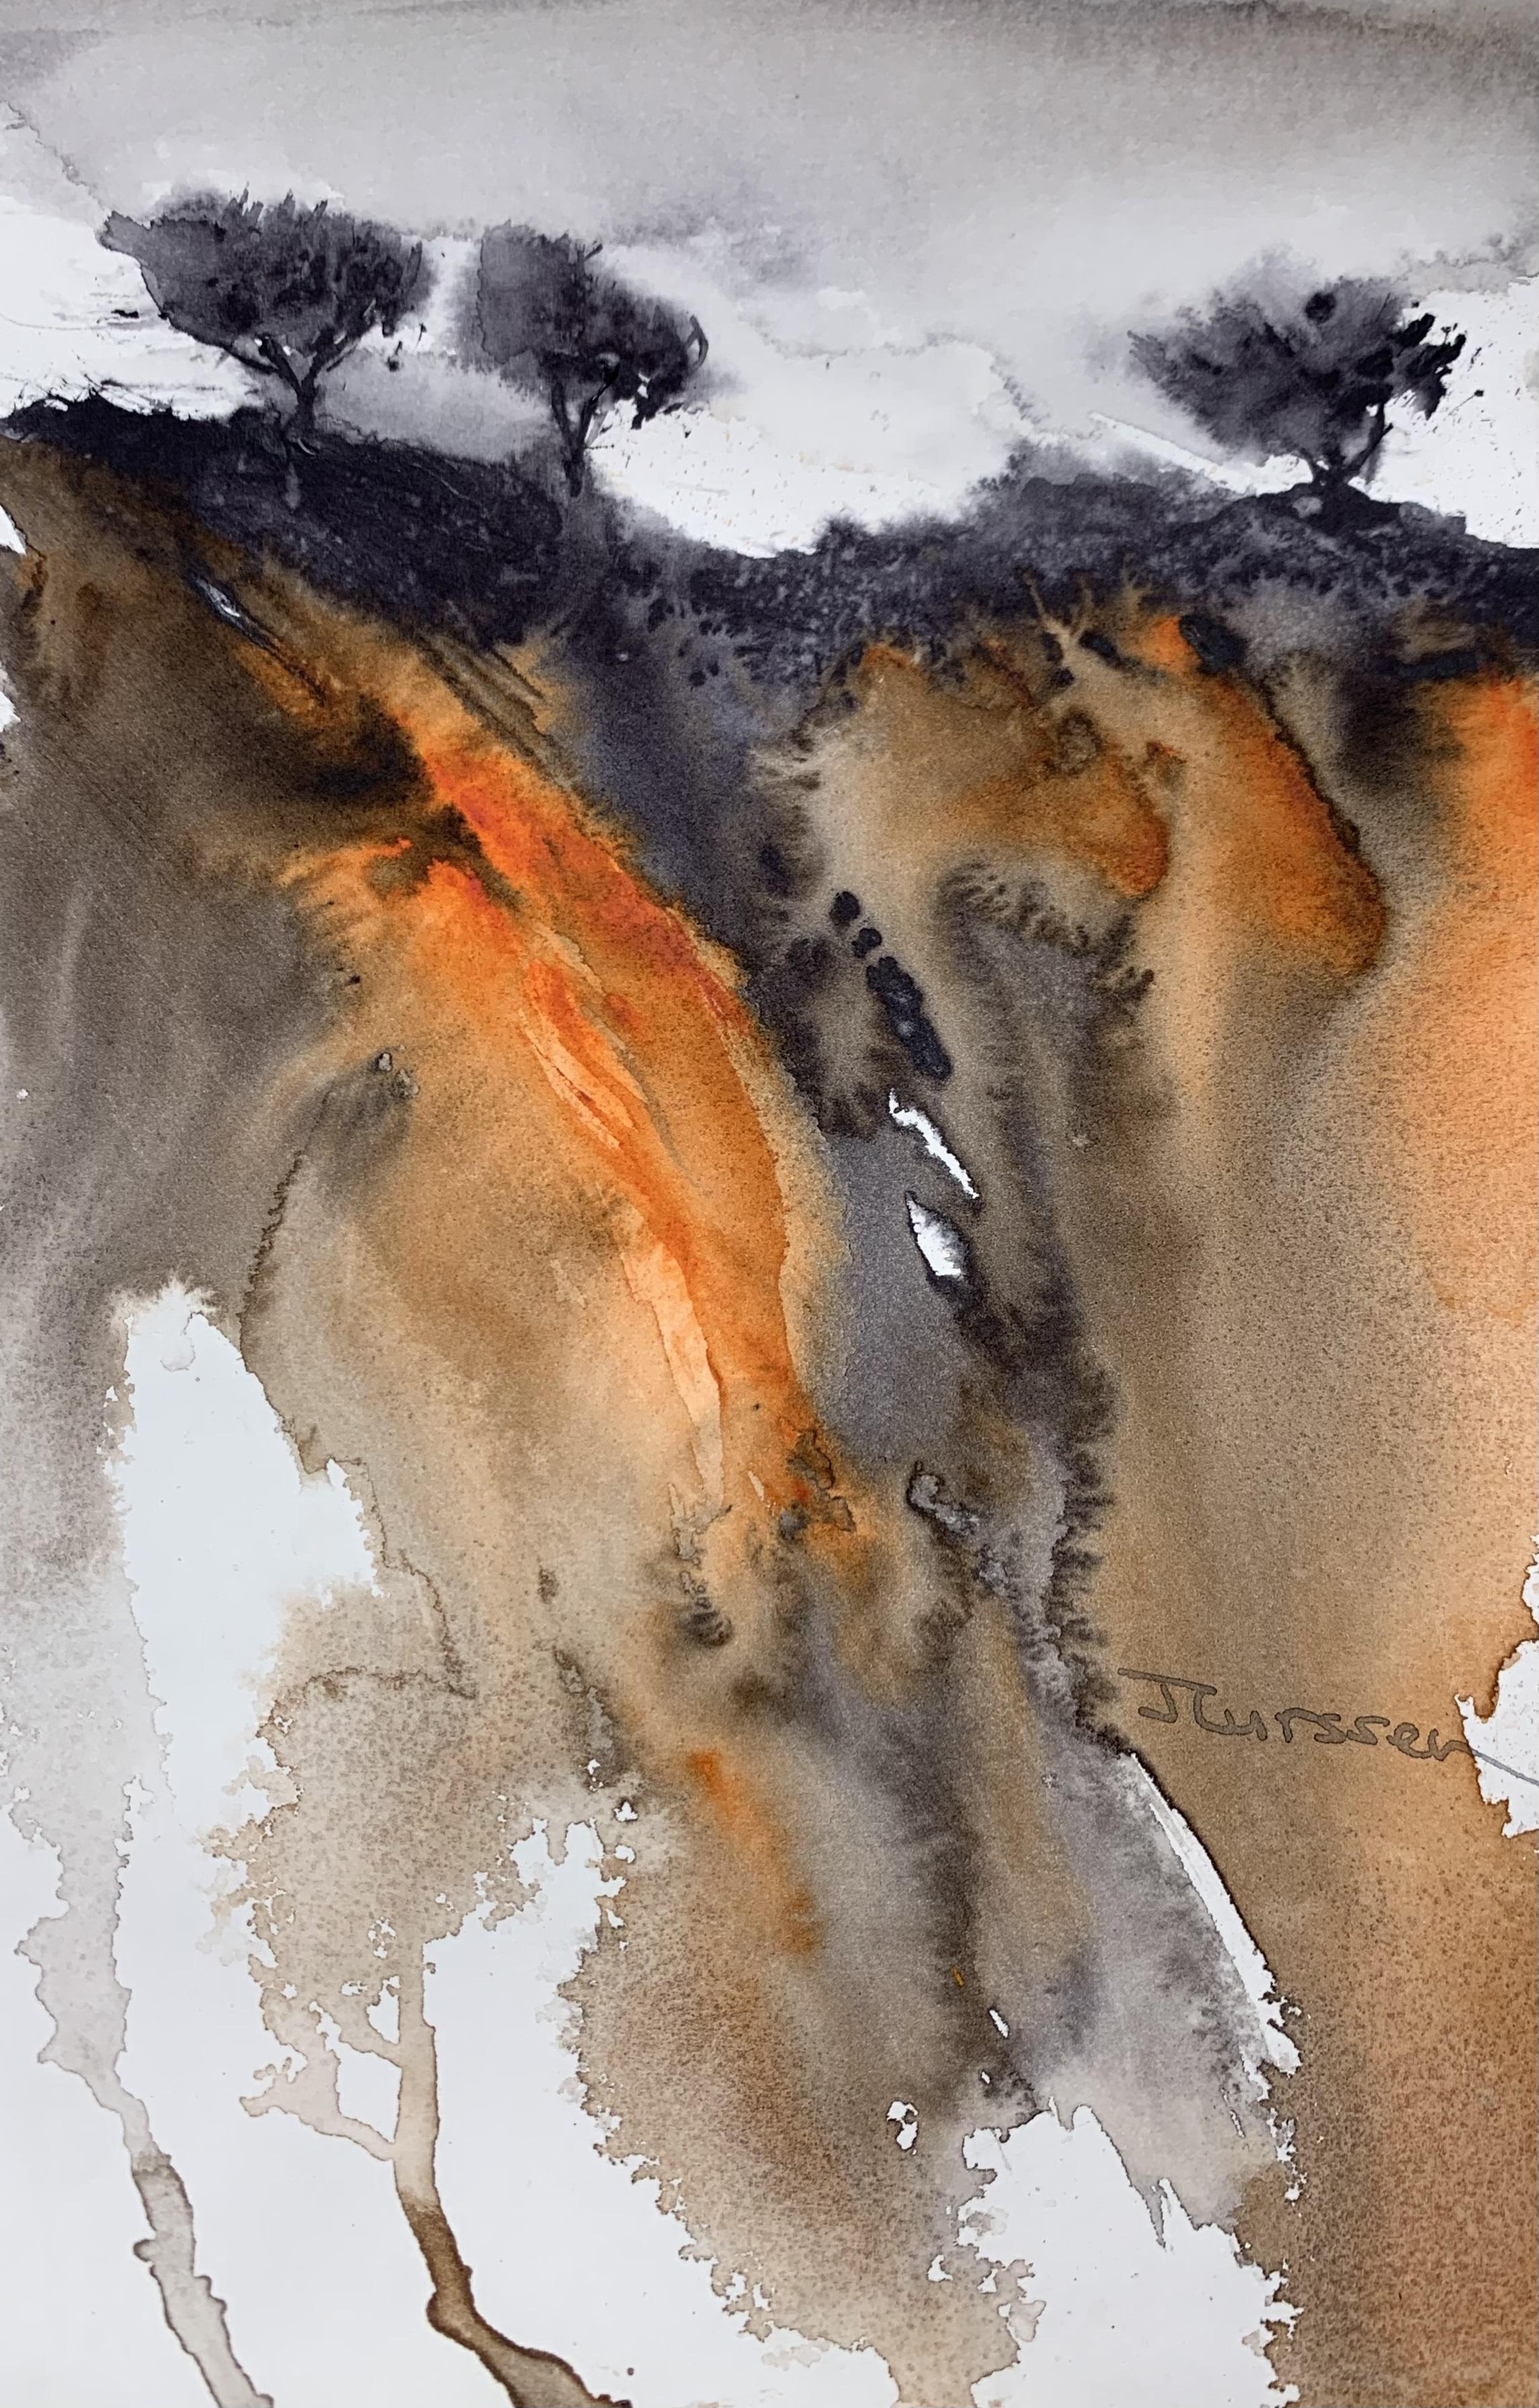 Jean Lurssen Abstract Drawing - Imagined Landscape, Painting, Watercolor on Watercolor Paper